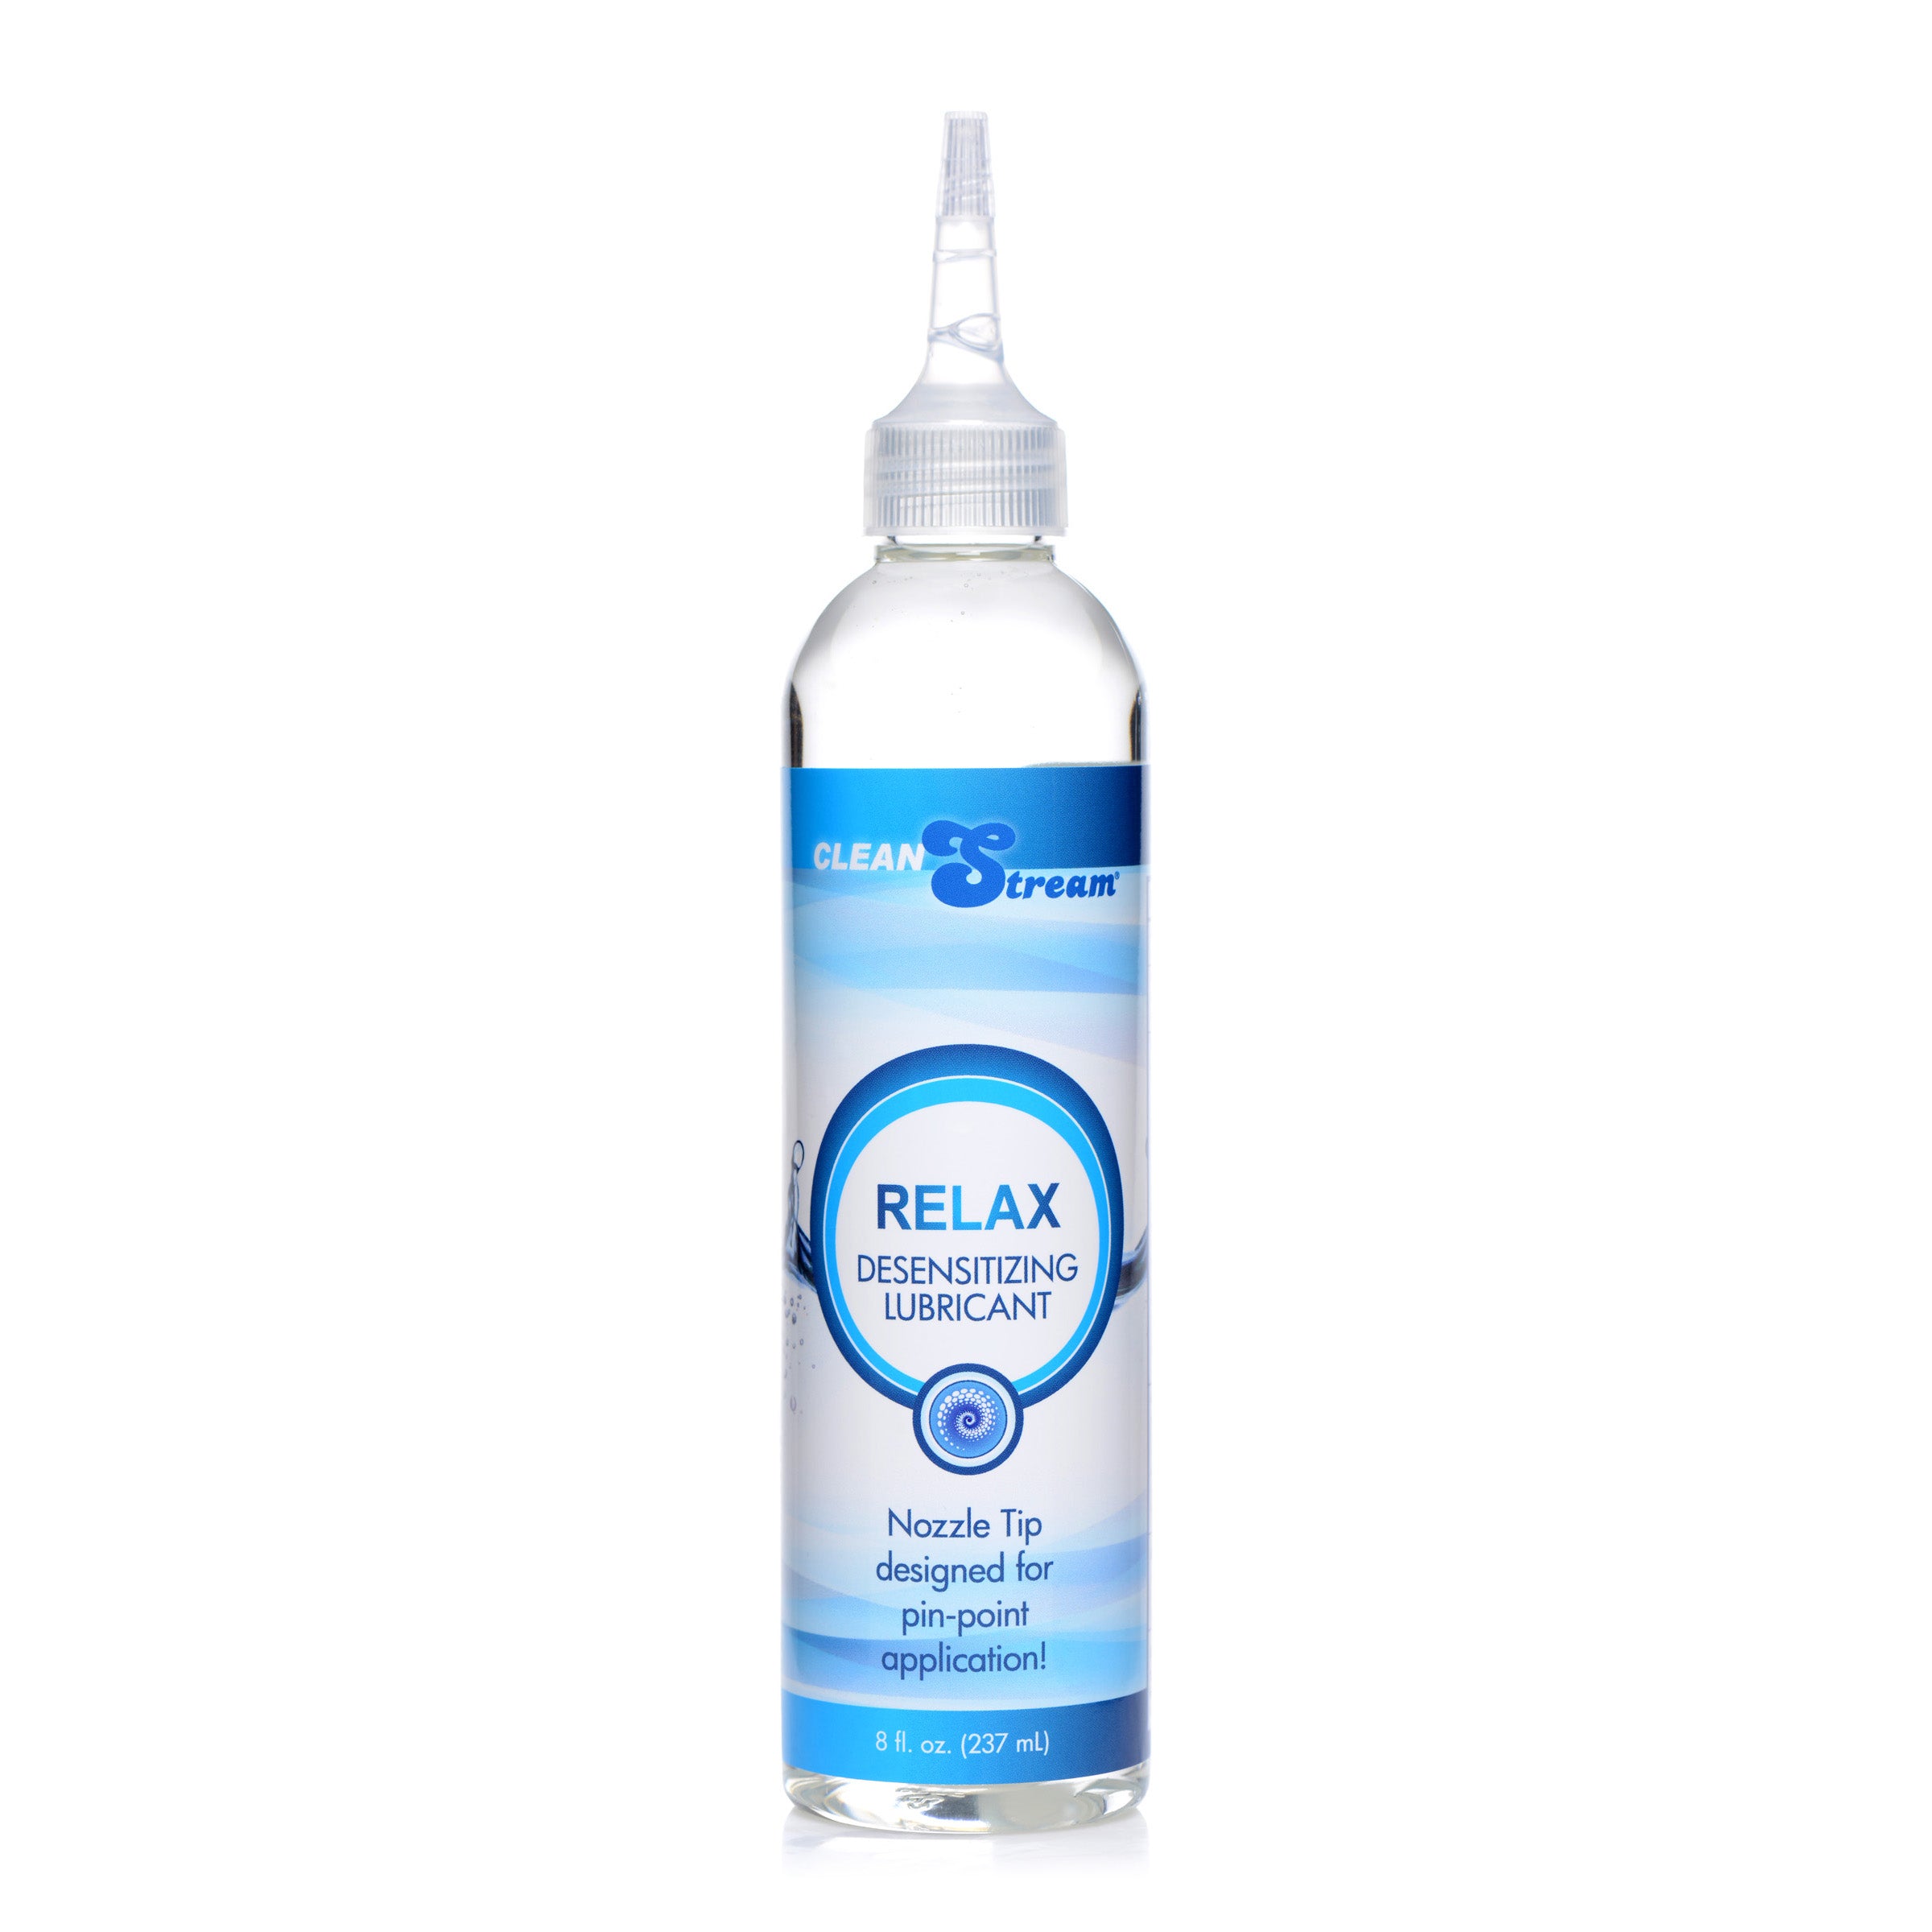 Relax Desensitizing Lubricant With Nozzle Tip - 8oz